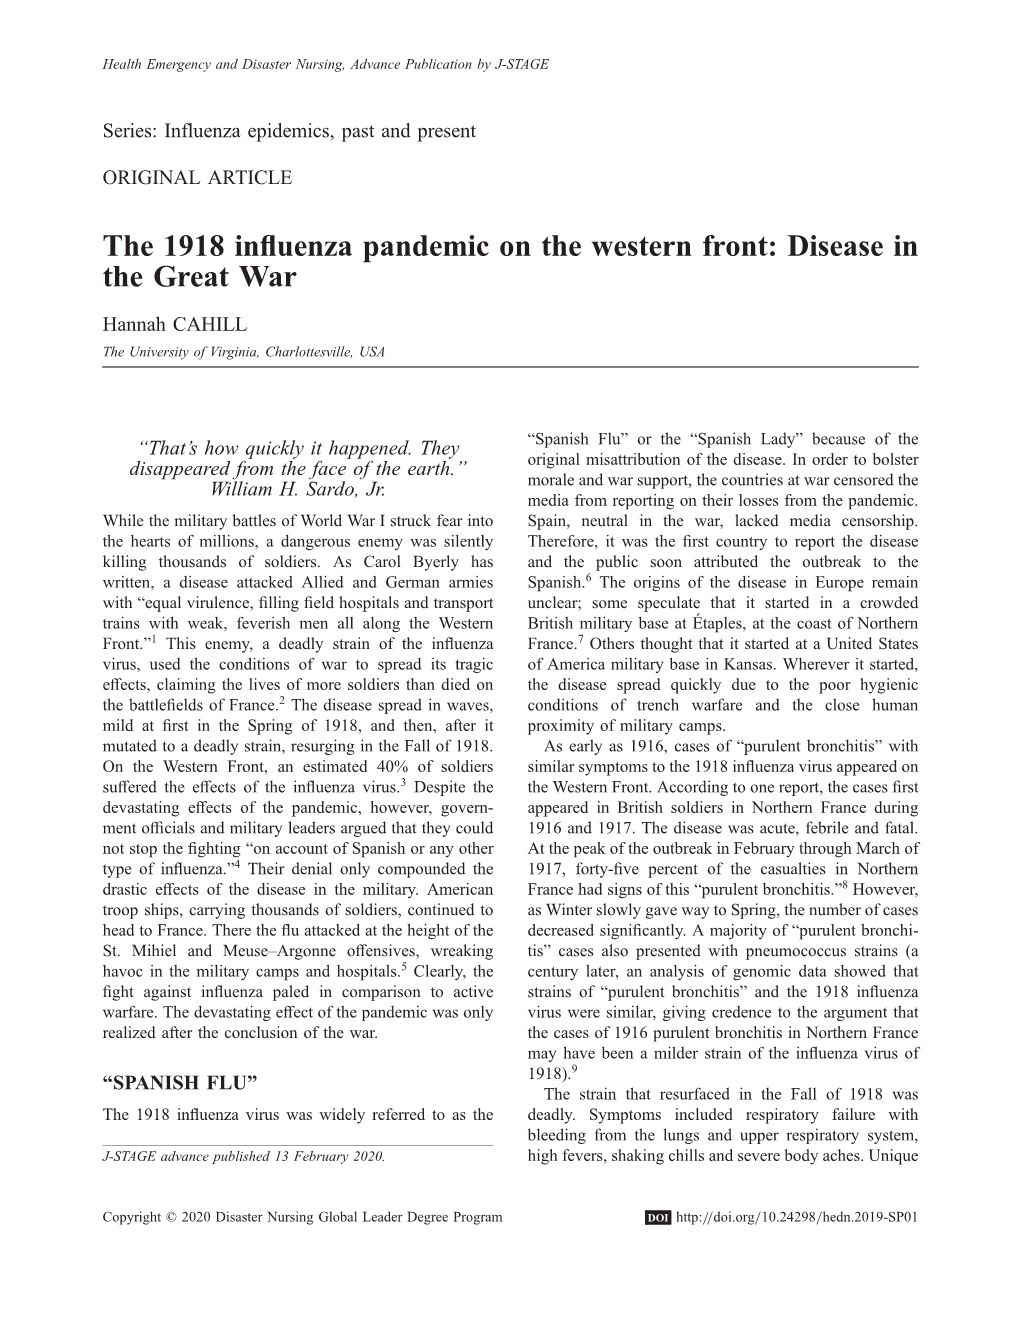 The 1918 Influenza Pandemic on the Western Front: Disease in the Great